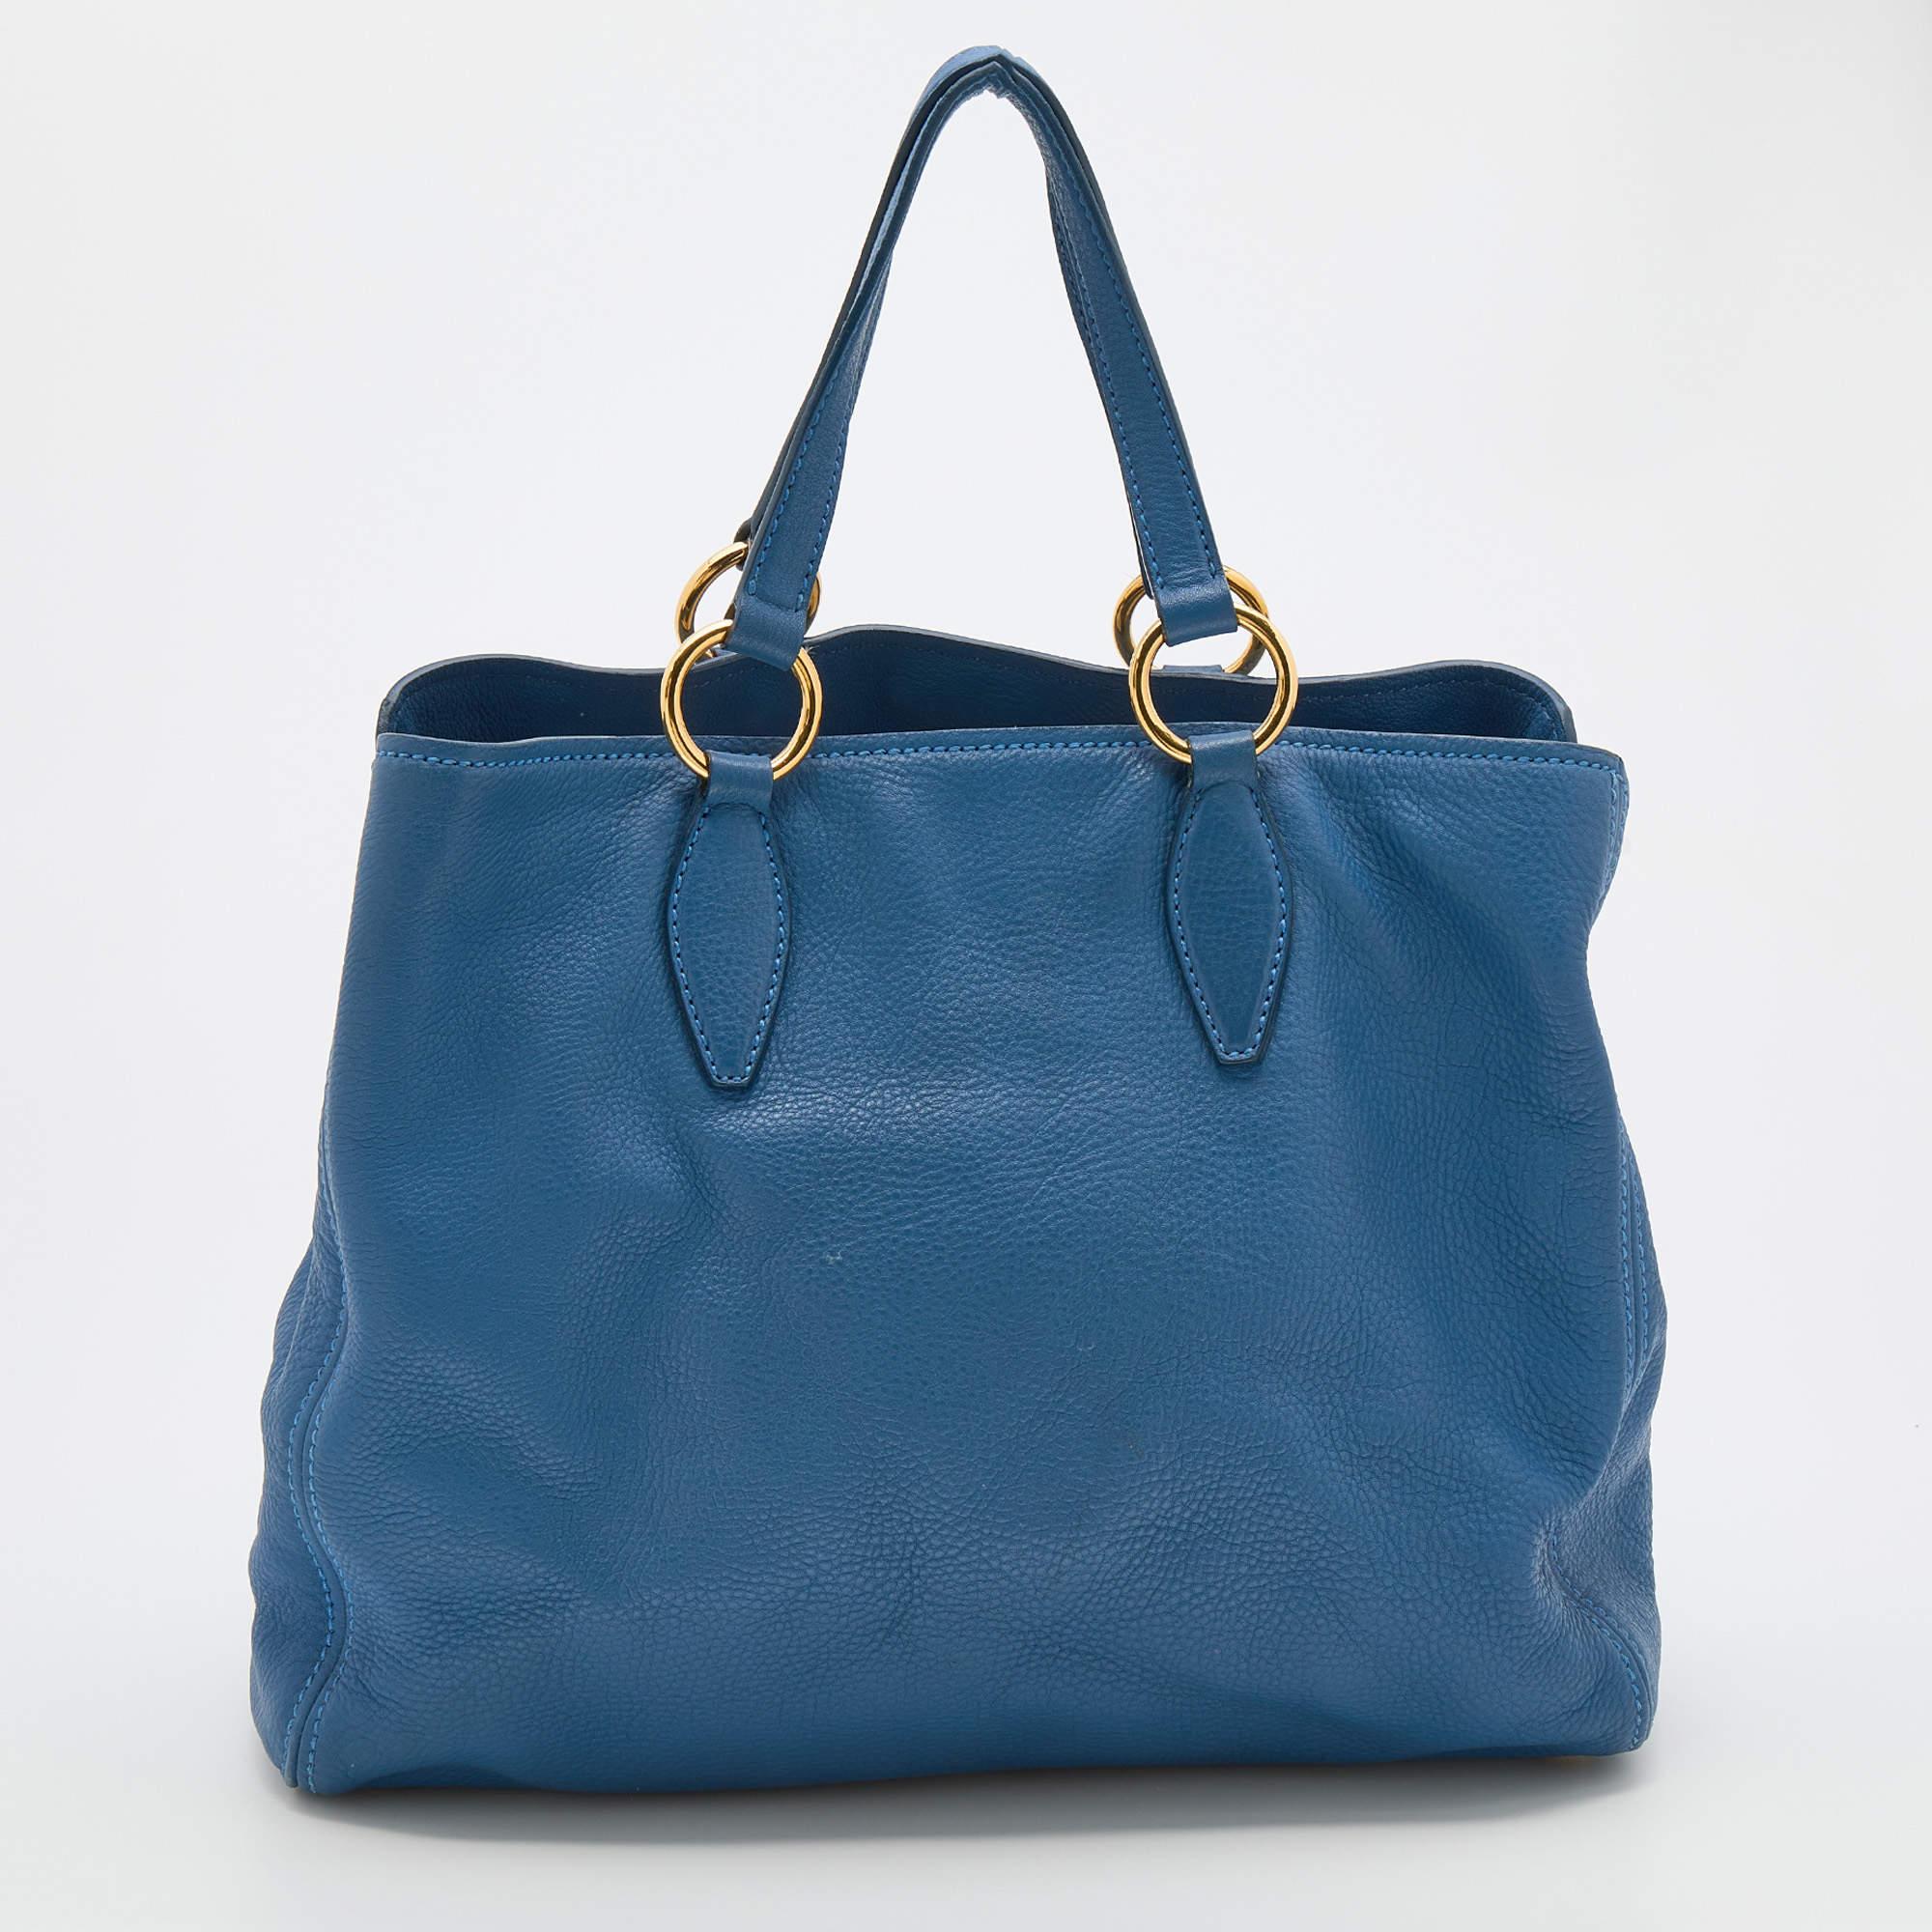 Bringing a mix of timeless fashion and fine craftsmanship is this tote. The bag comes with a durable exterior, comfortable handles, shiny hardware, and a capacious interior. Fine elements complete the tote in a luxe way.

Includes: Original Dustbag,